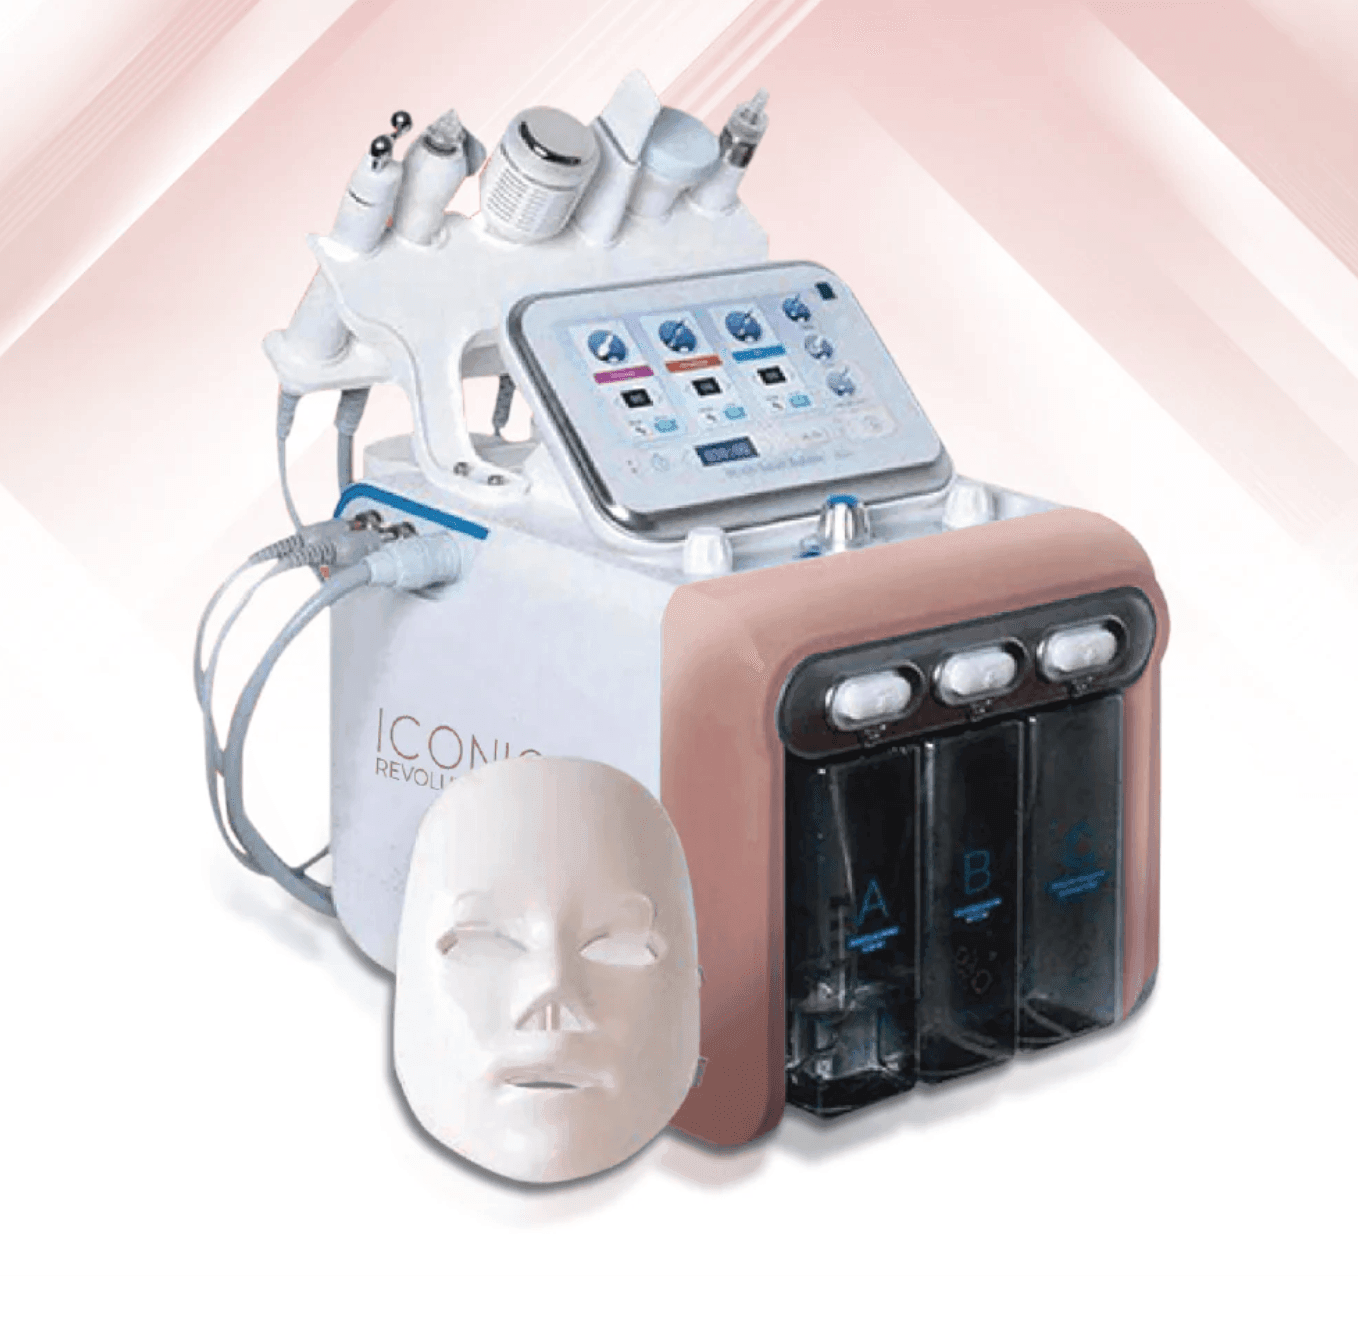 Introducing the 7-in-1 Hydra Facial Machine